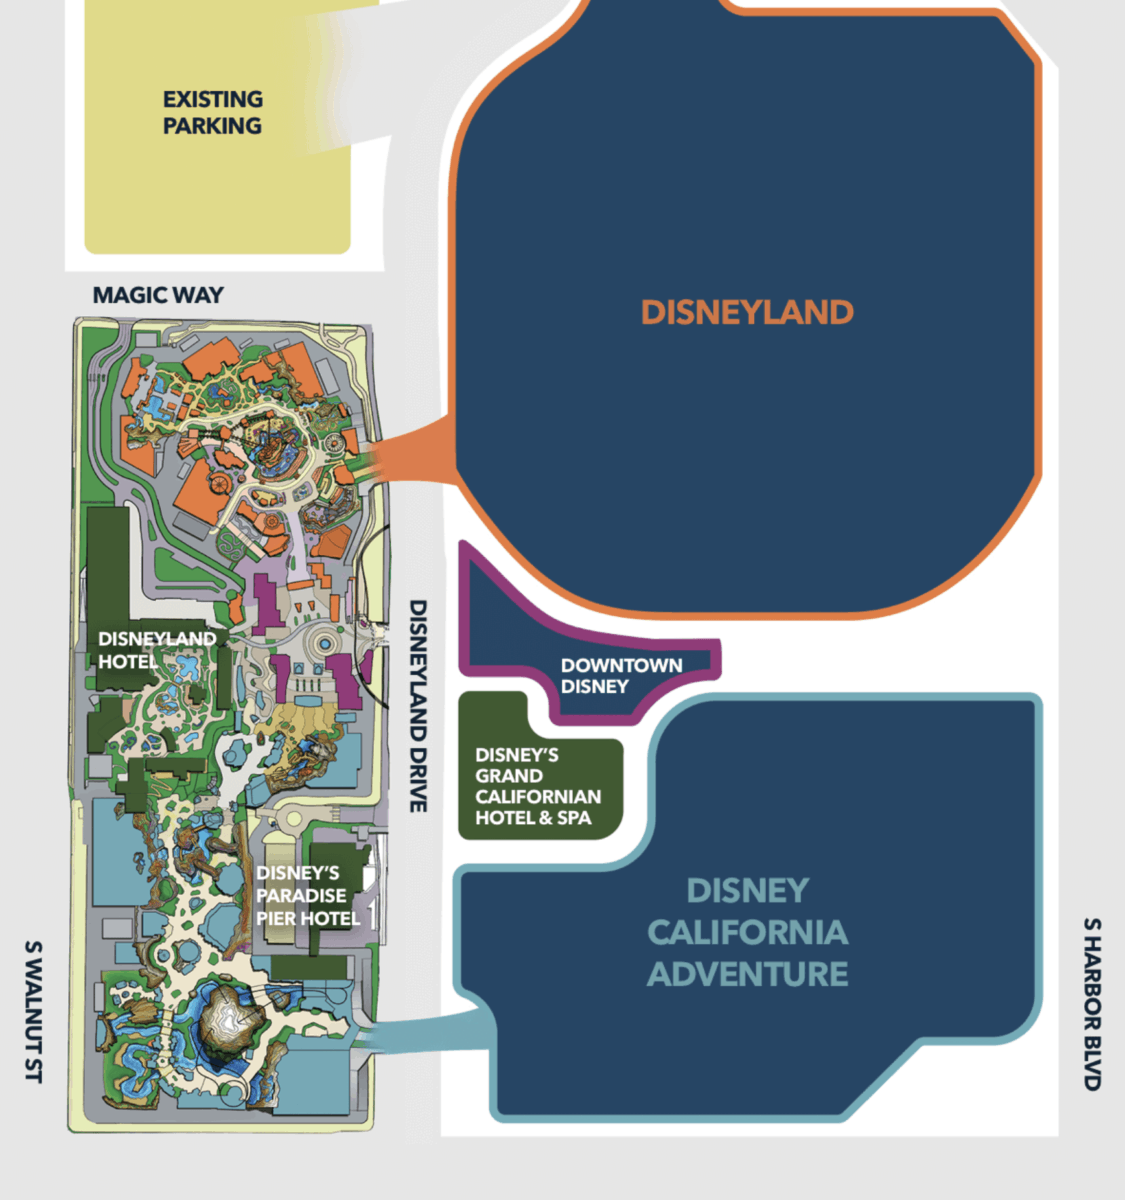 Disneyland New Theme Park Layout Includes Black Panther Themed Land